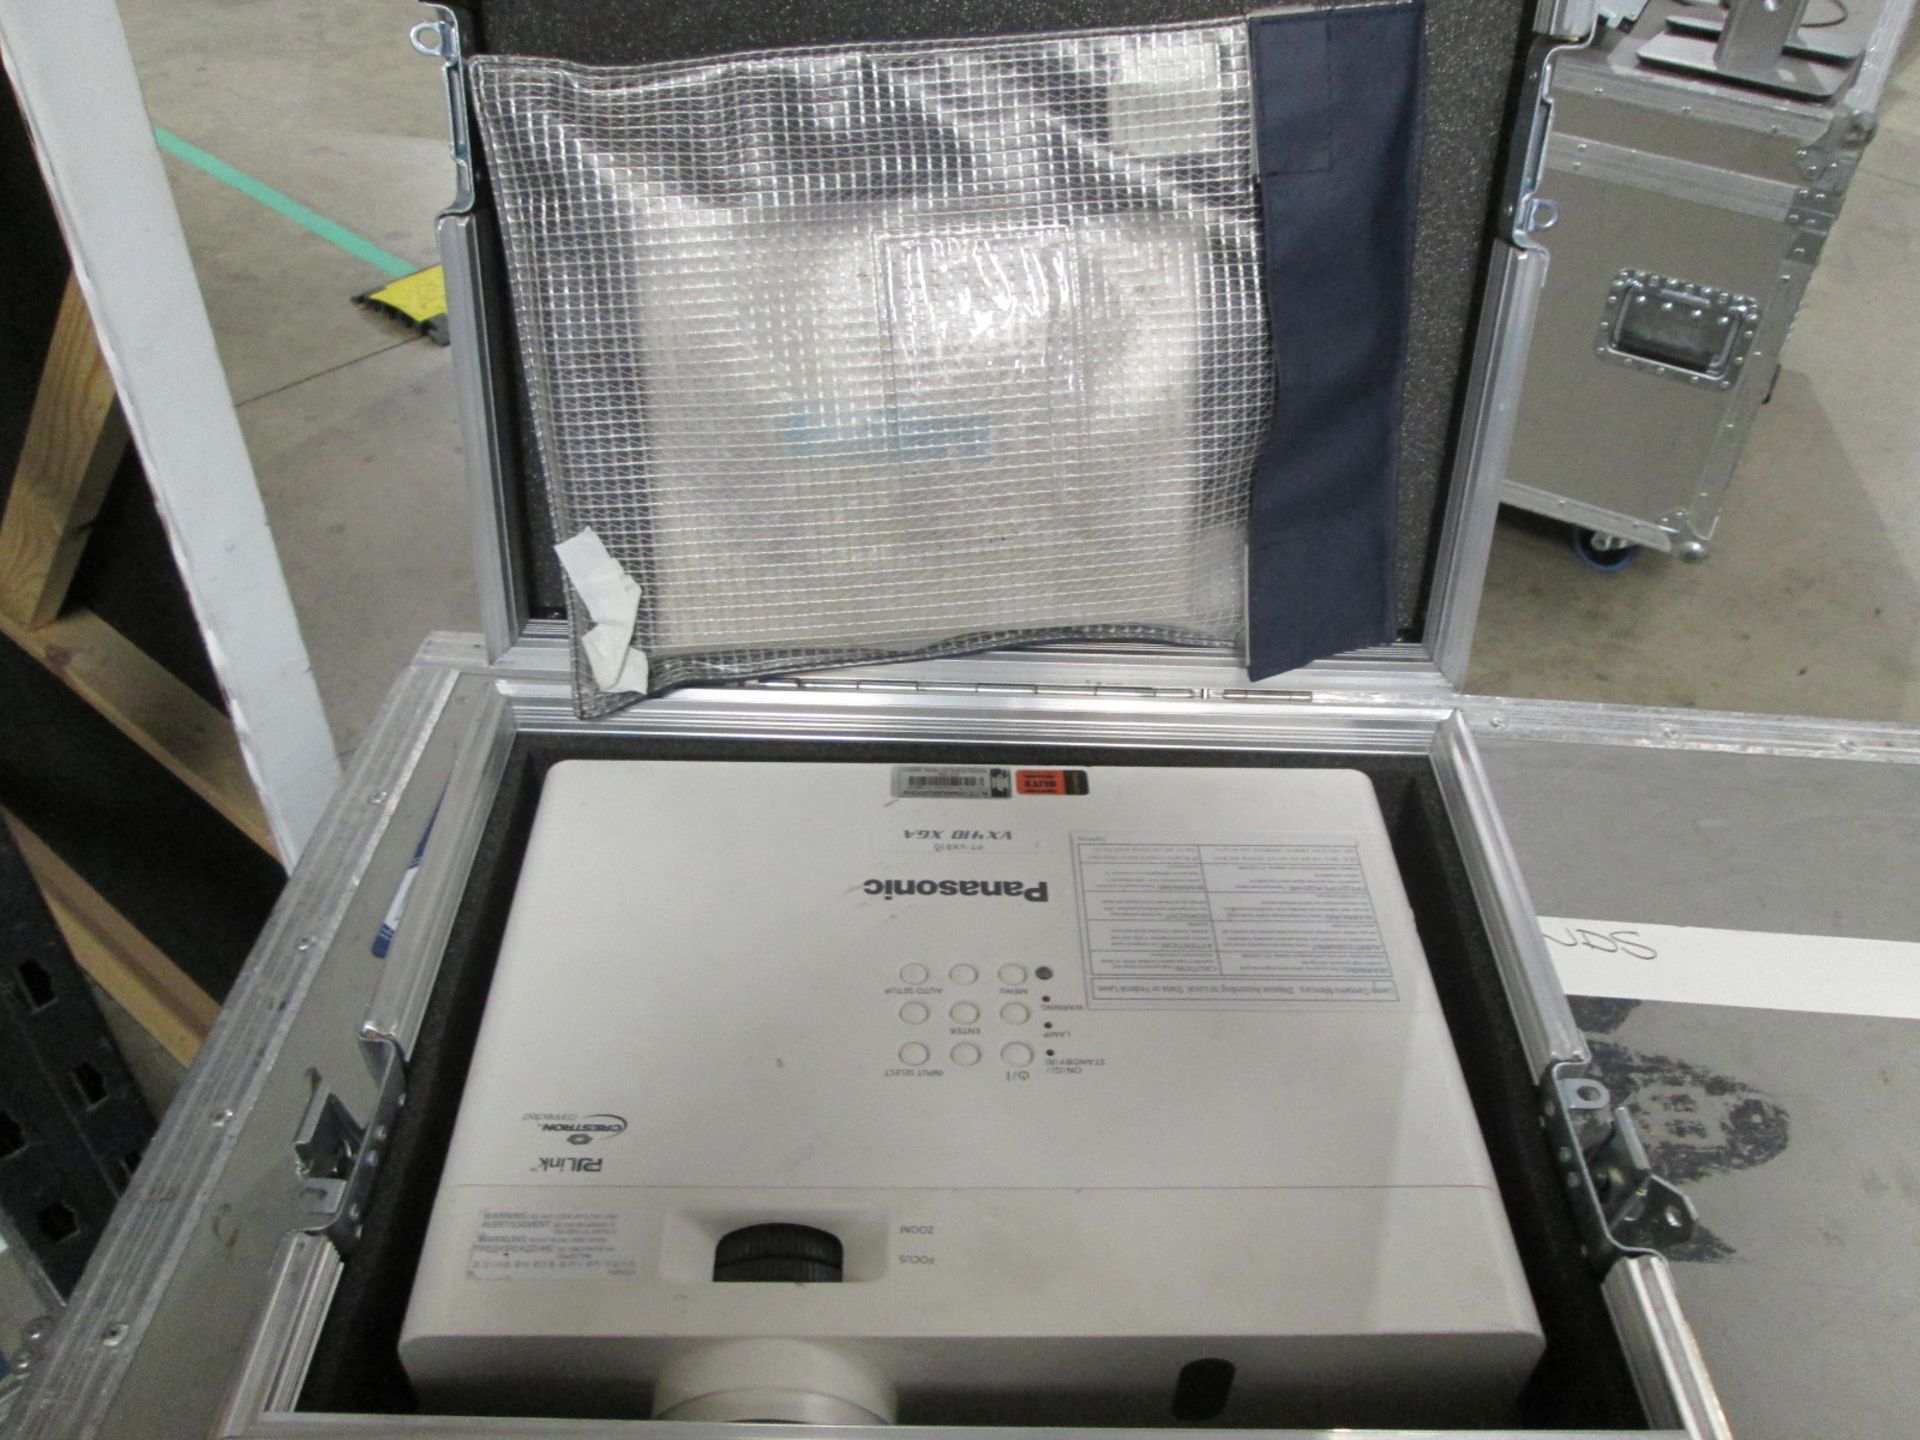 Panasonic PT-VX410Z LCD Projector, S/N DC4640030, YOM 2014, In flight case - Image 6 of 7